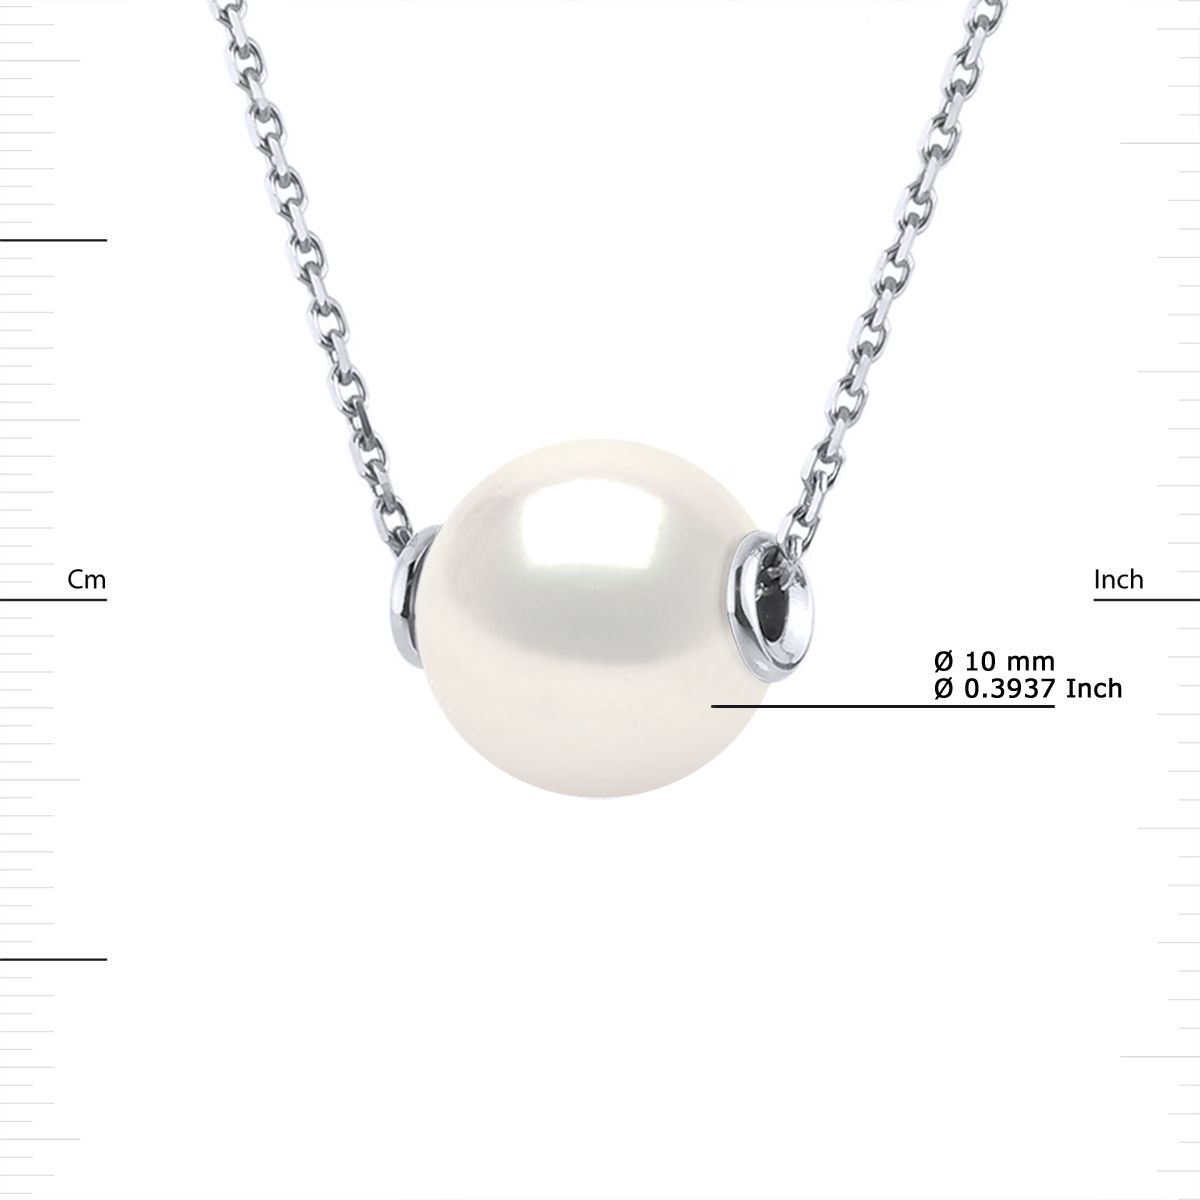 Necklace in chain mesh 925 Sterling Silver Rhodium-plated and true Cultured Freshwater Pearls 10-11 mm - Natural White Color Length 42 cm , 16,5 in - Our jewellery is made in France and will be delivered in a gift box accompanied by a Certificate of Authenticity and International Warranty